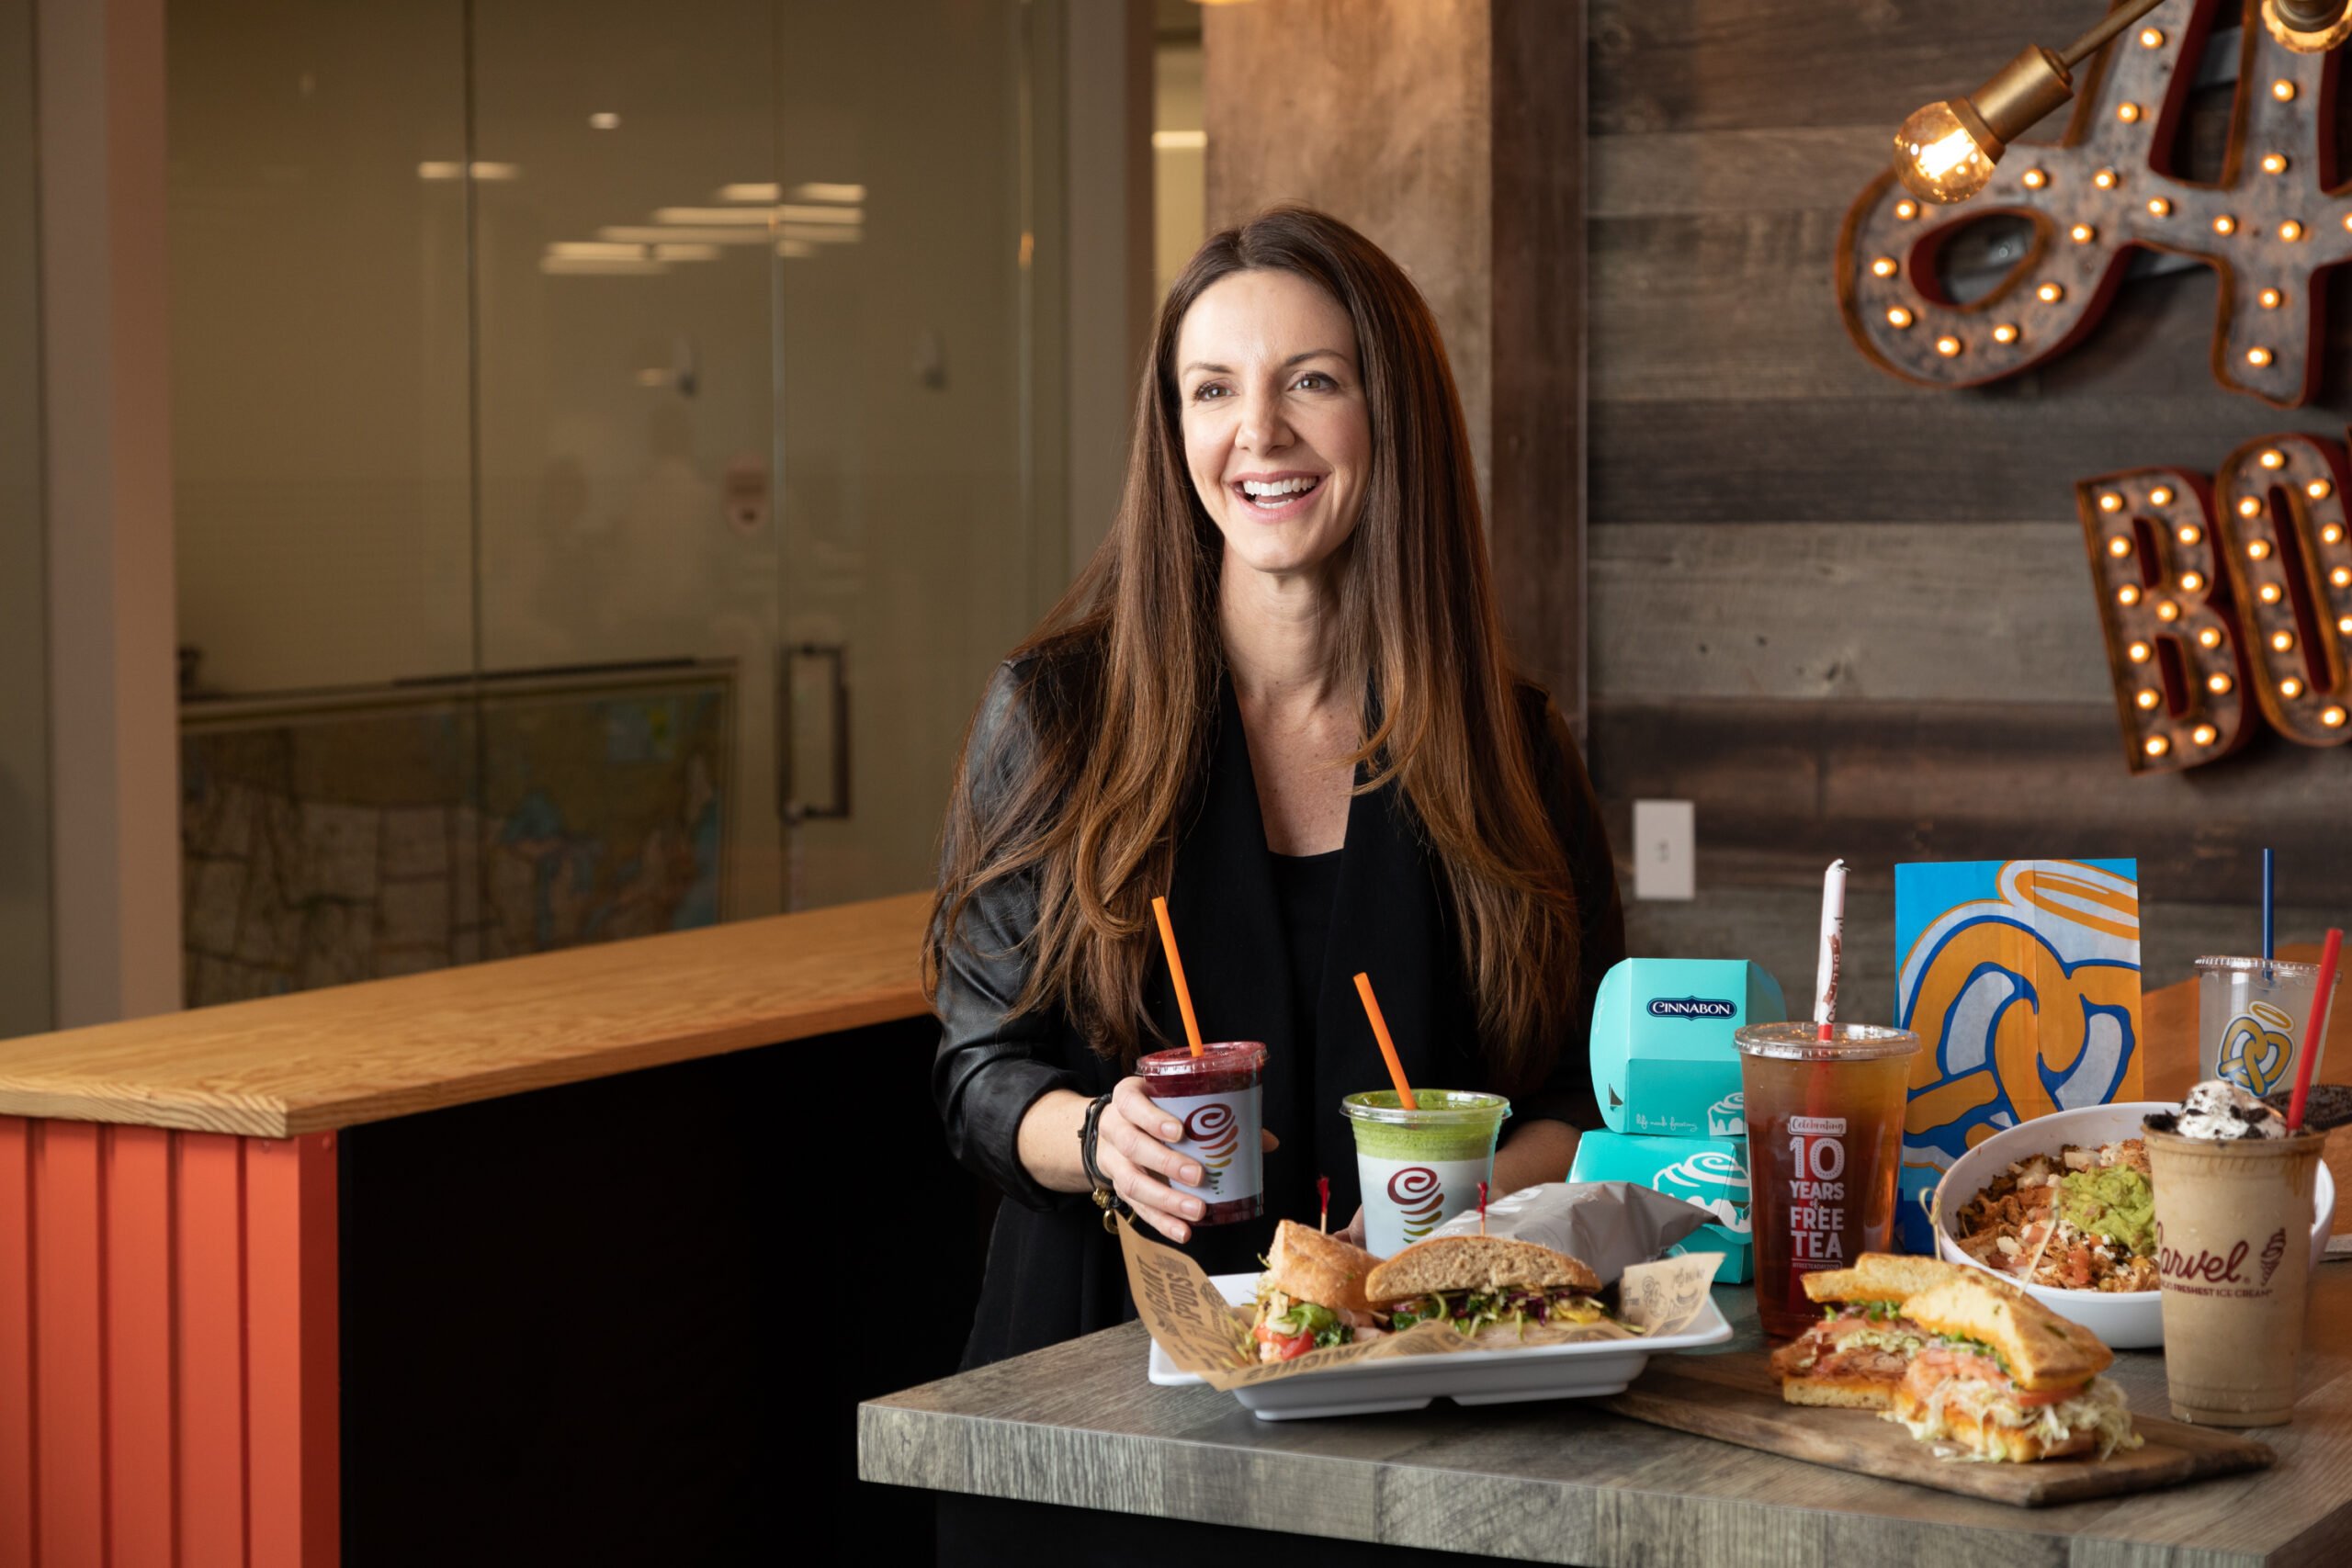 Kevin Heagney catches a candid shot of Kat Cole sitting at a table with a display of fast food